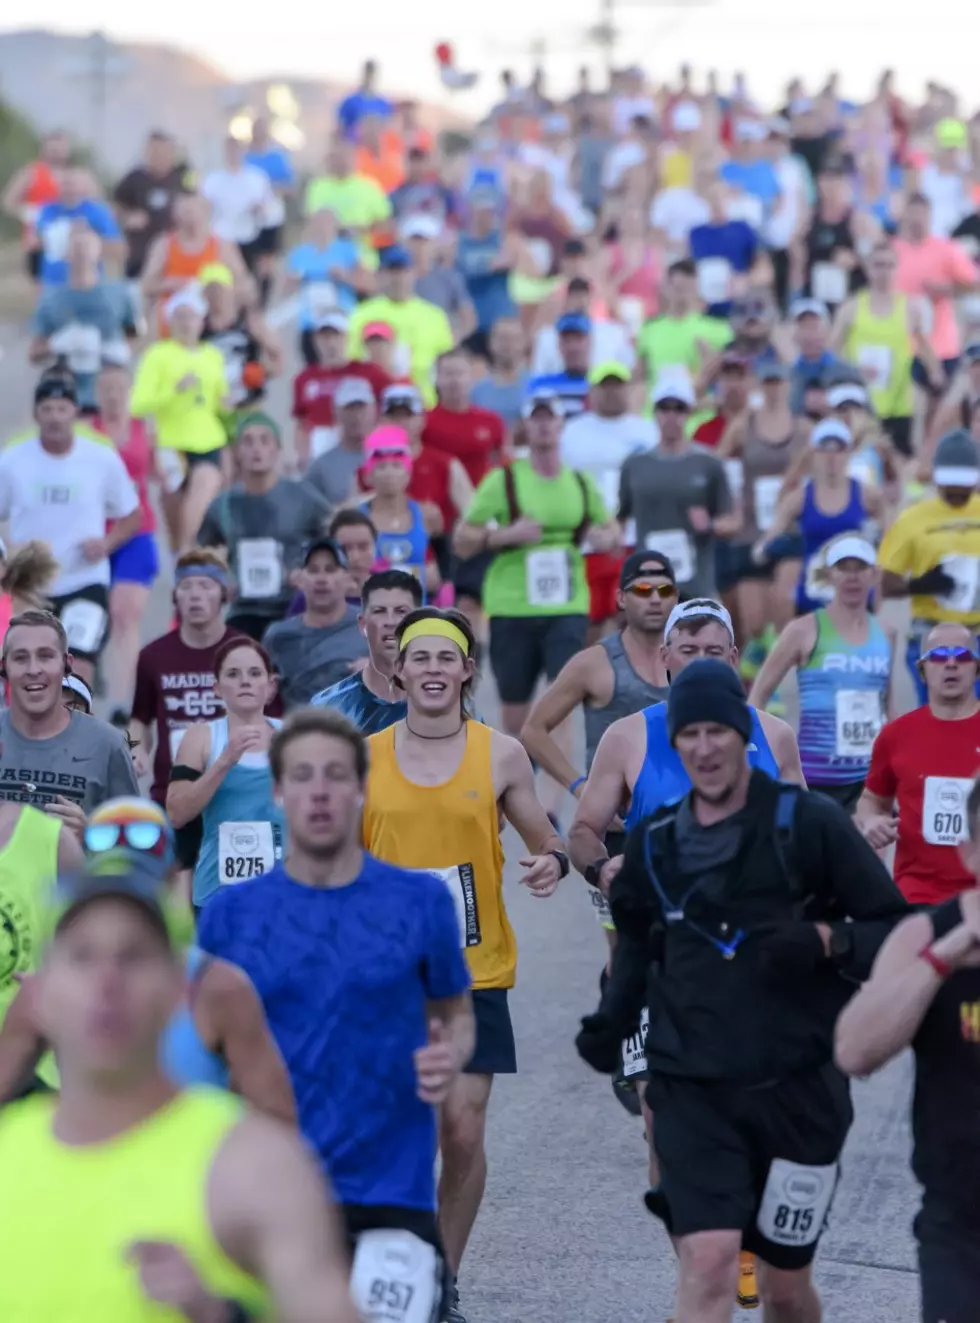 Marathon joins Ironman, Senior Games in canceling 2020 St. George events